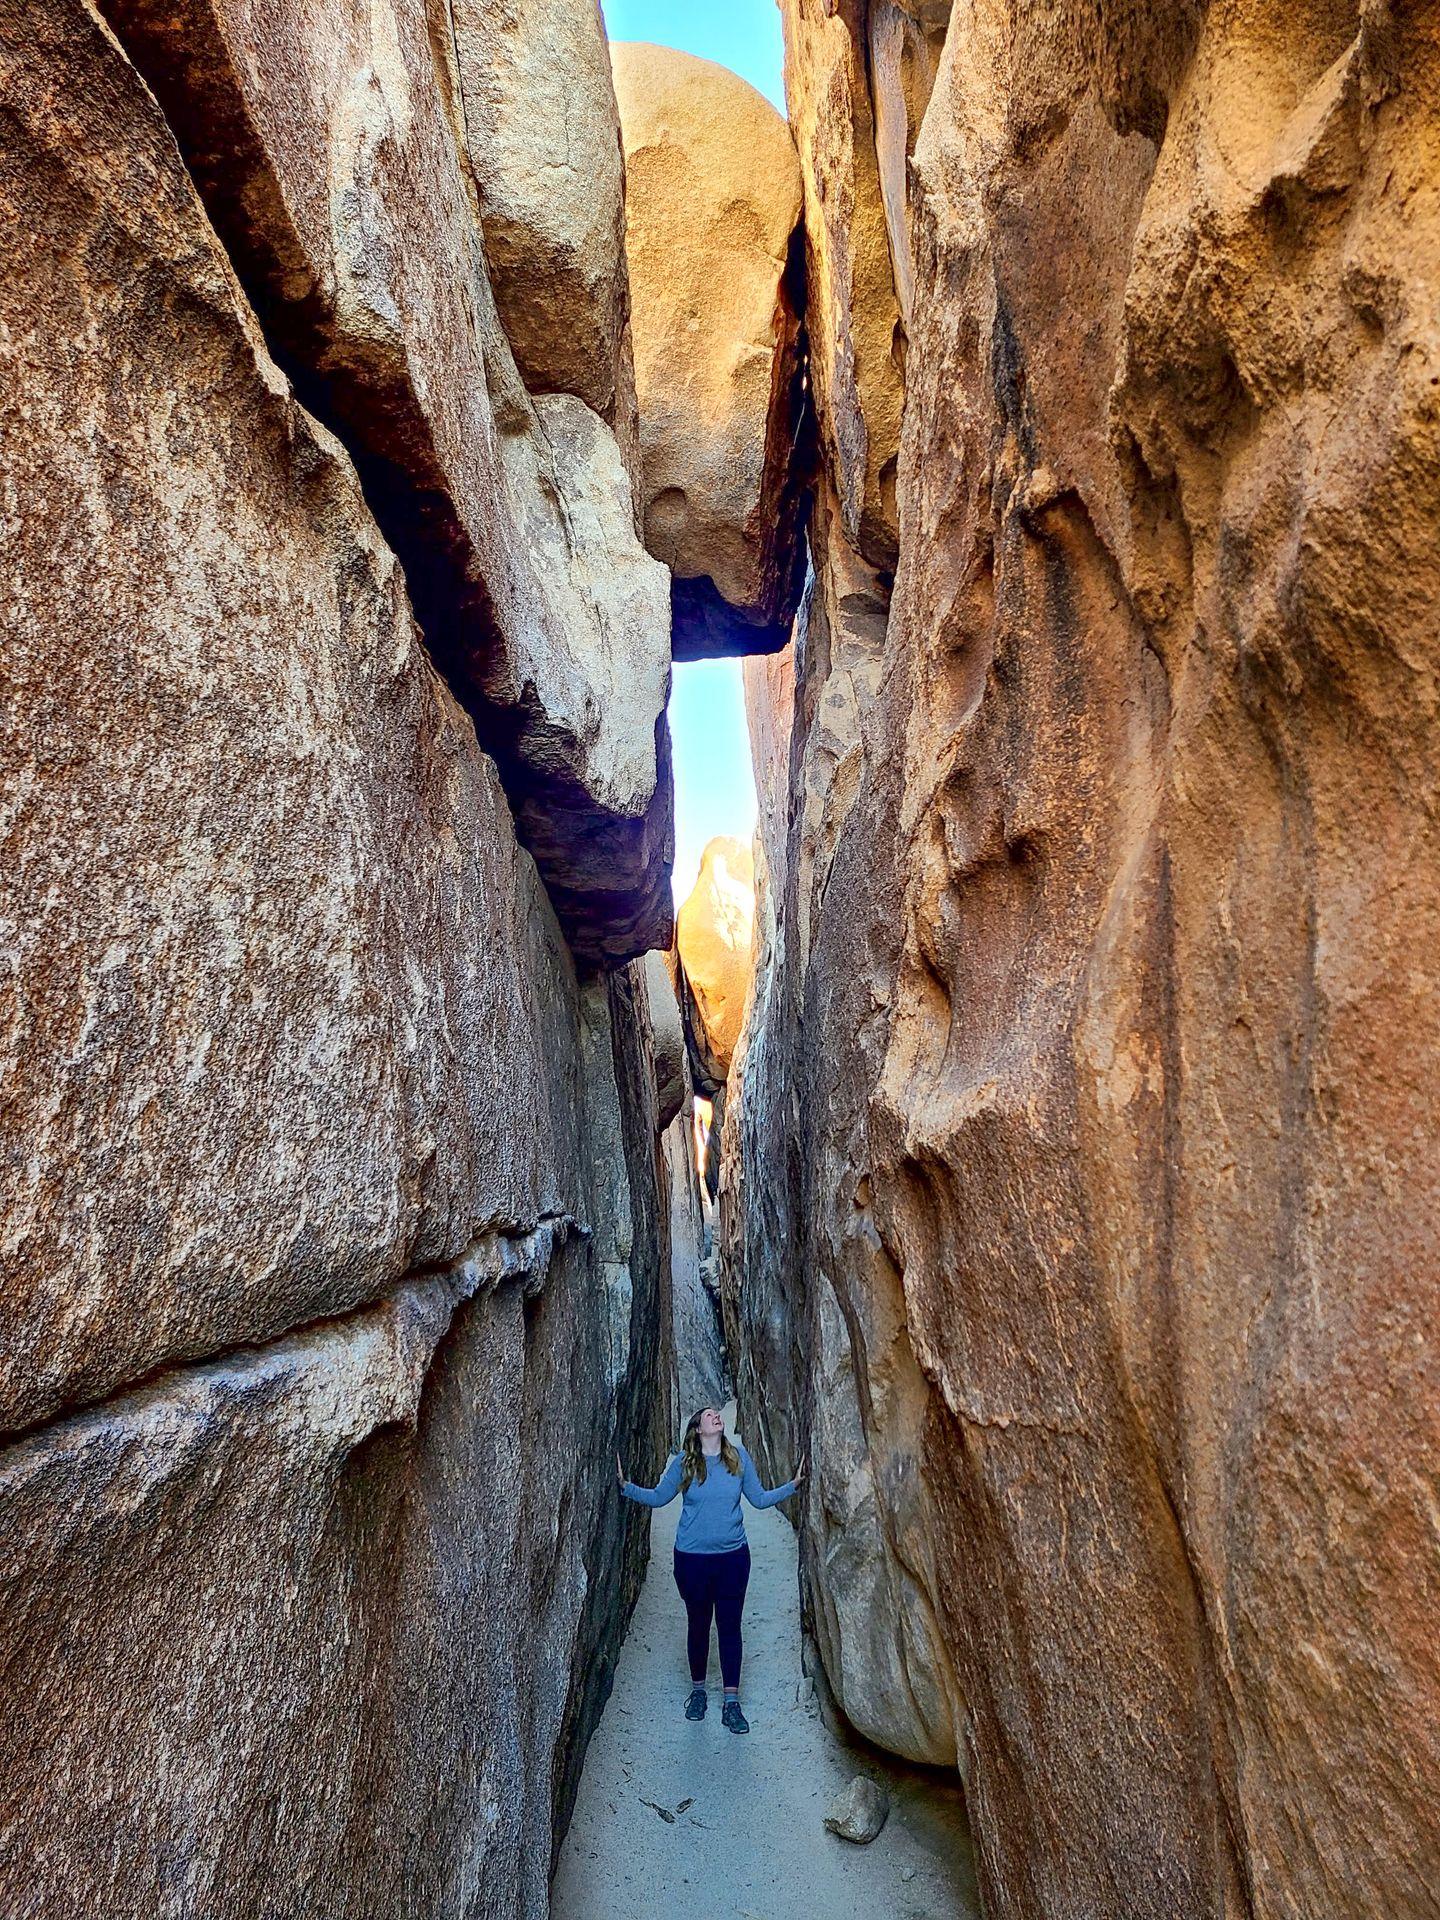 Lydia standing in a towering slot canyon and looking up towards the opening above. A giant boulder sits on top of the canyon.